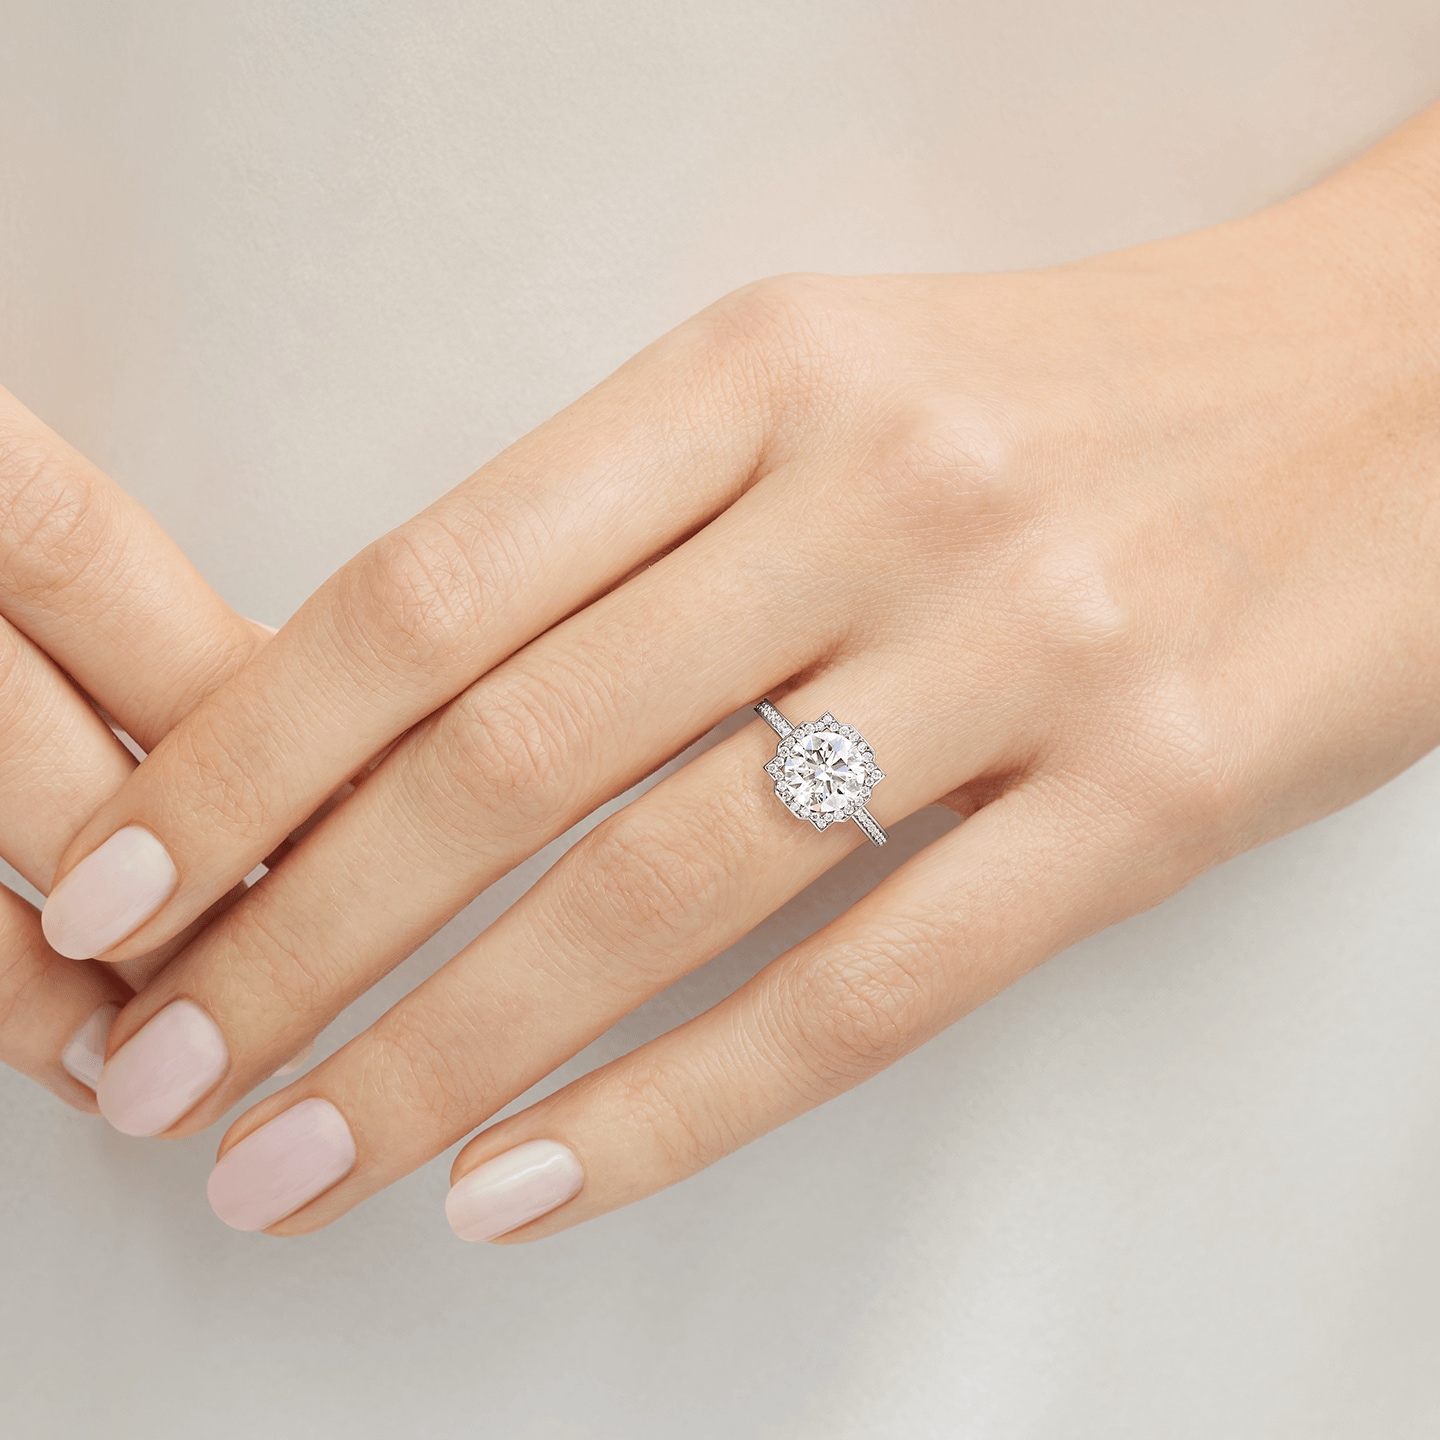 Belle Round Brilliant Diamond Micropavé Engagement Ring featured on a model